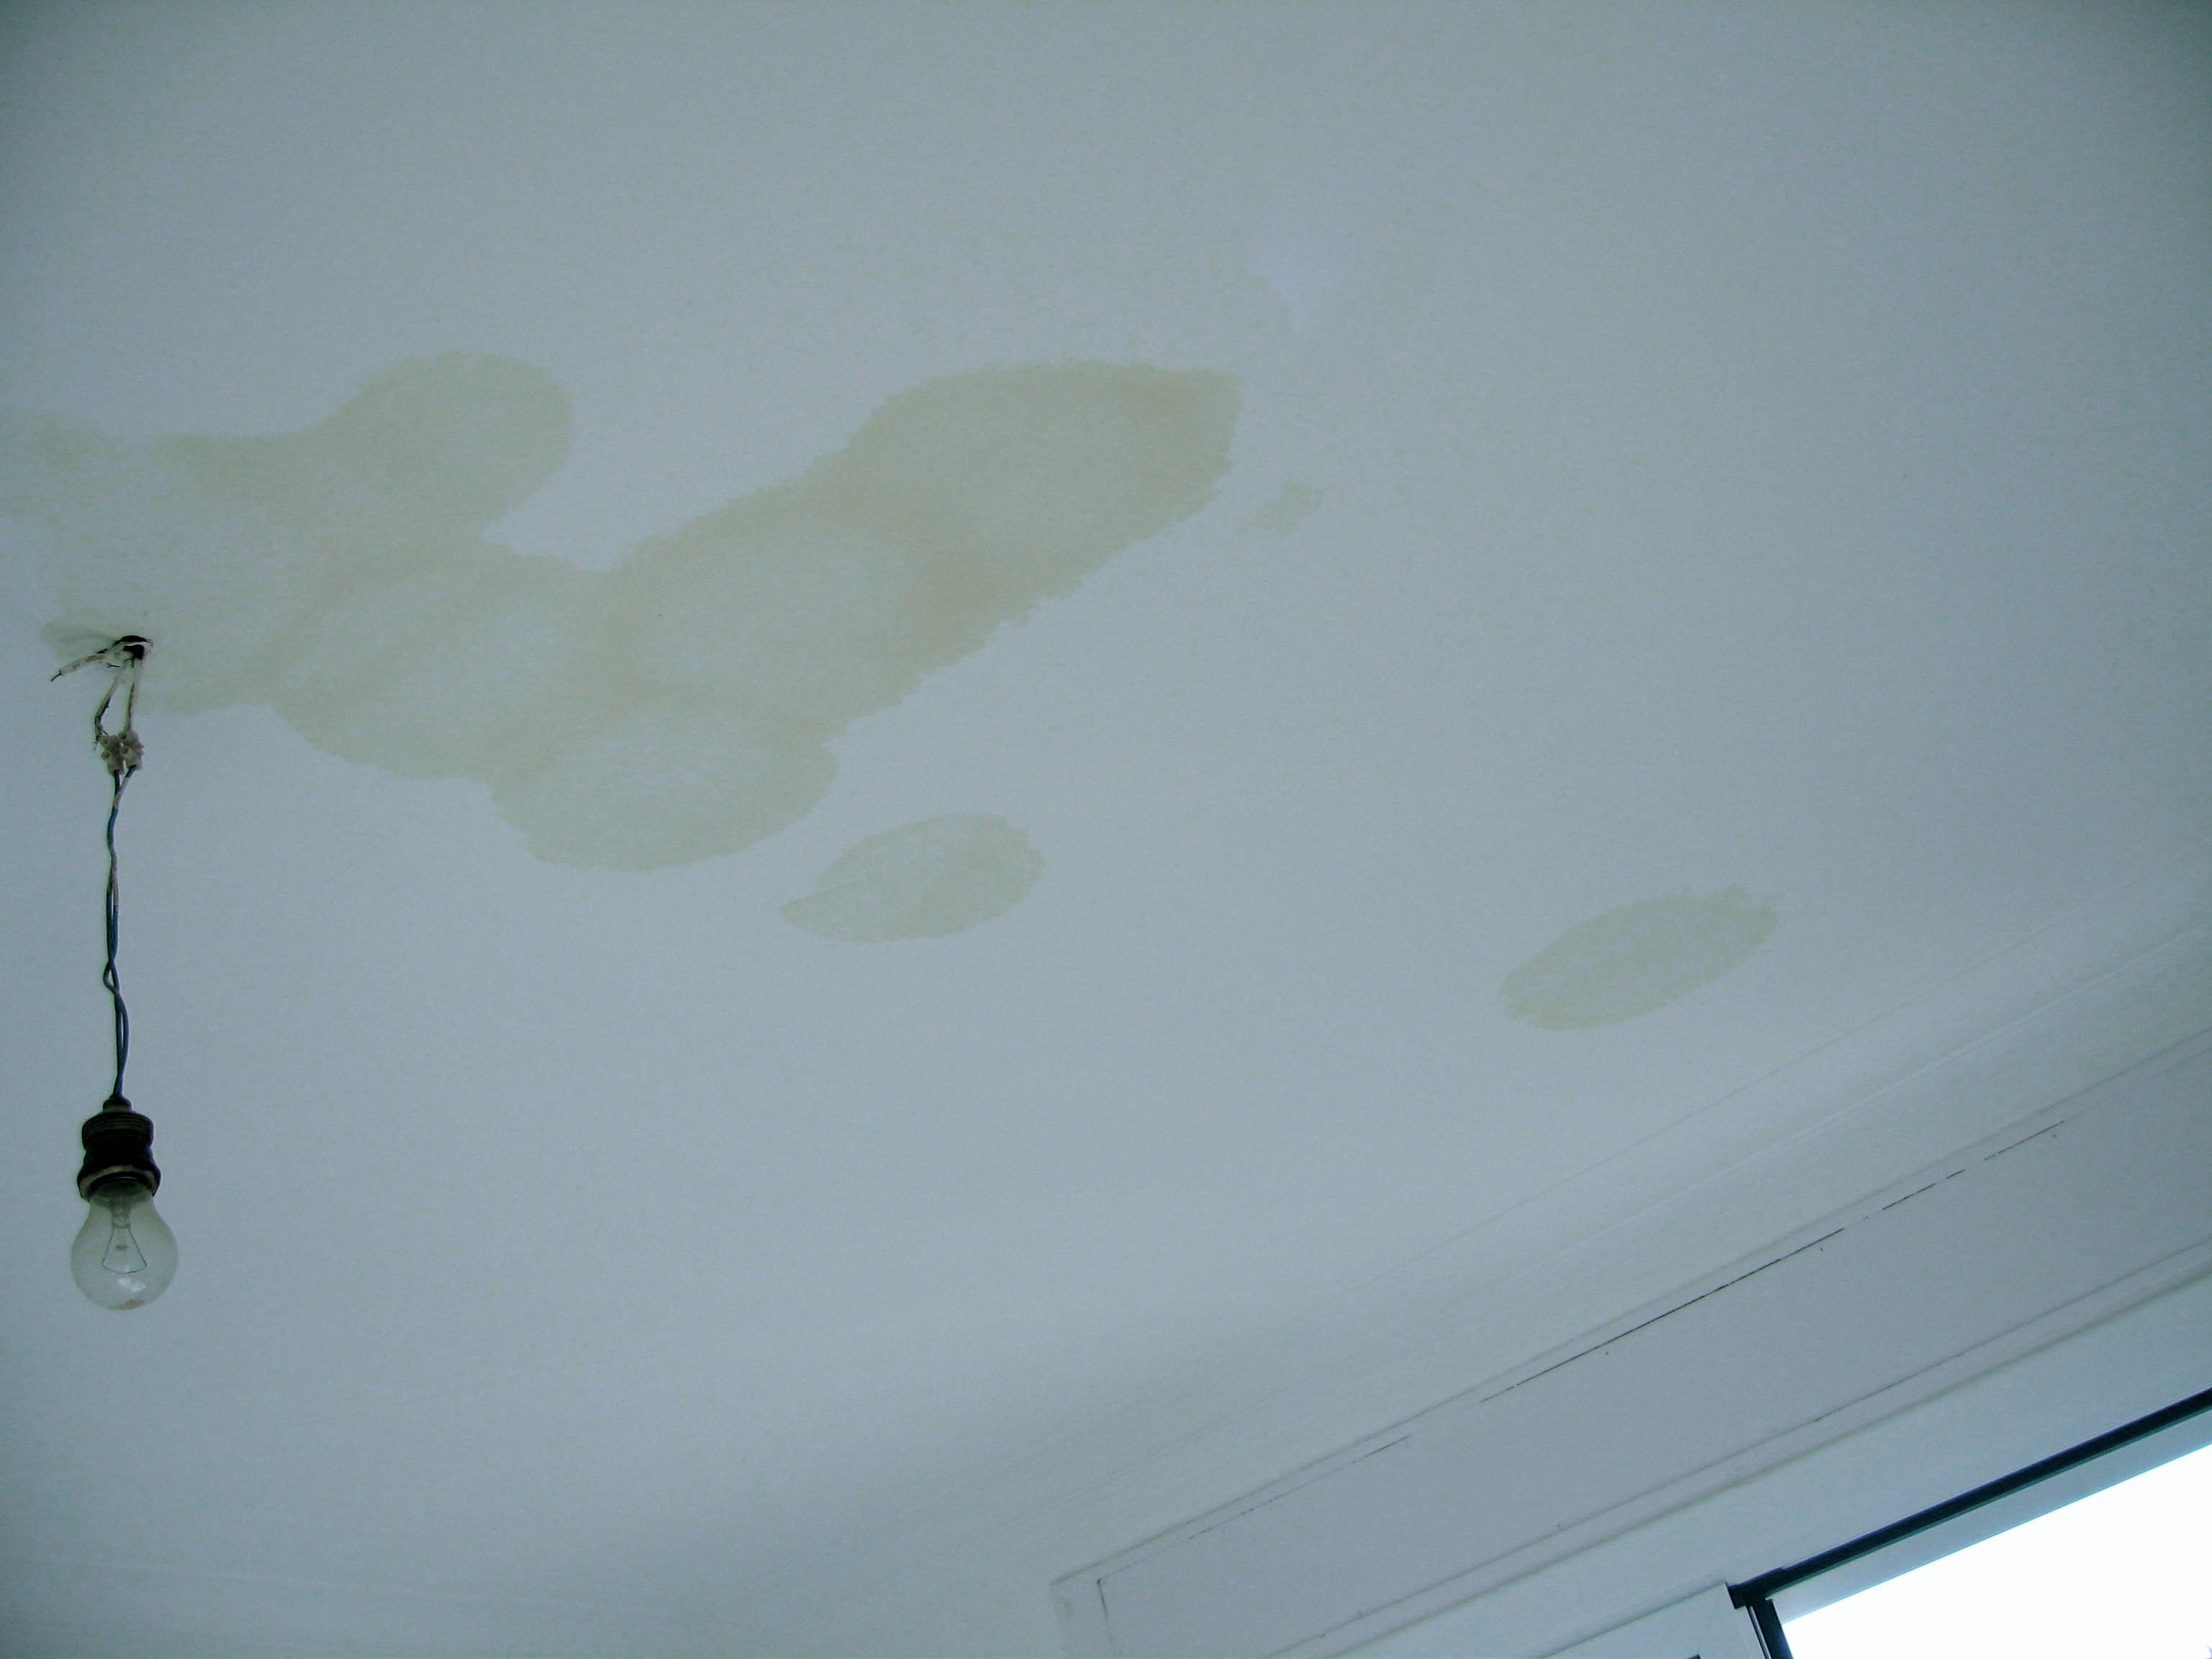 Ceiling Condensation Causes Water